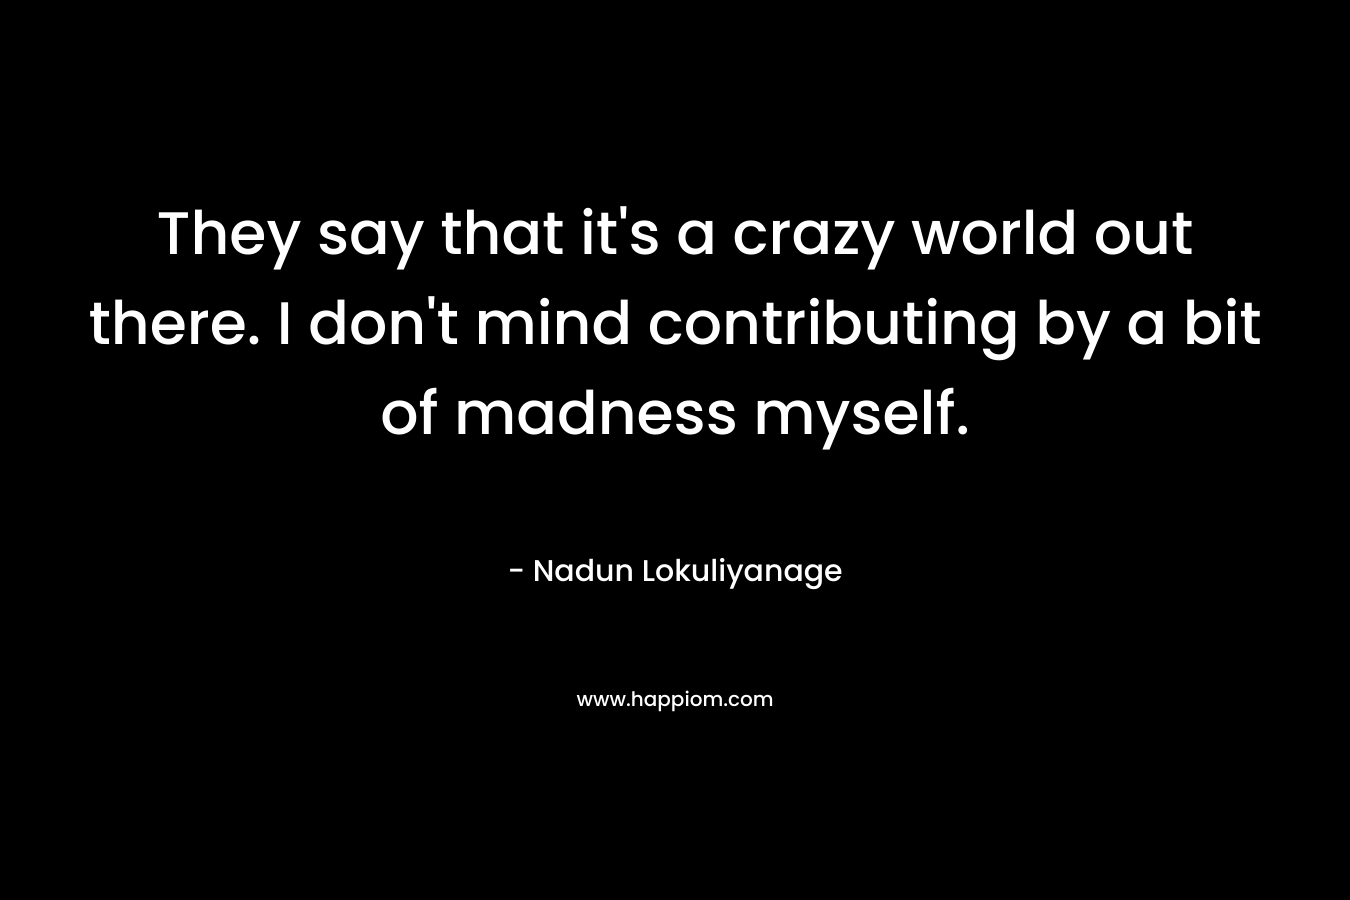 They say that it’s a crazy world out there. I don’t mind contributing by a bit of madness myself. – Nadun Lokuliyanage